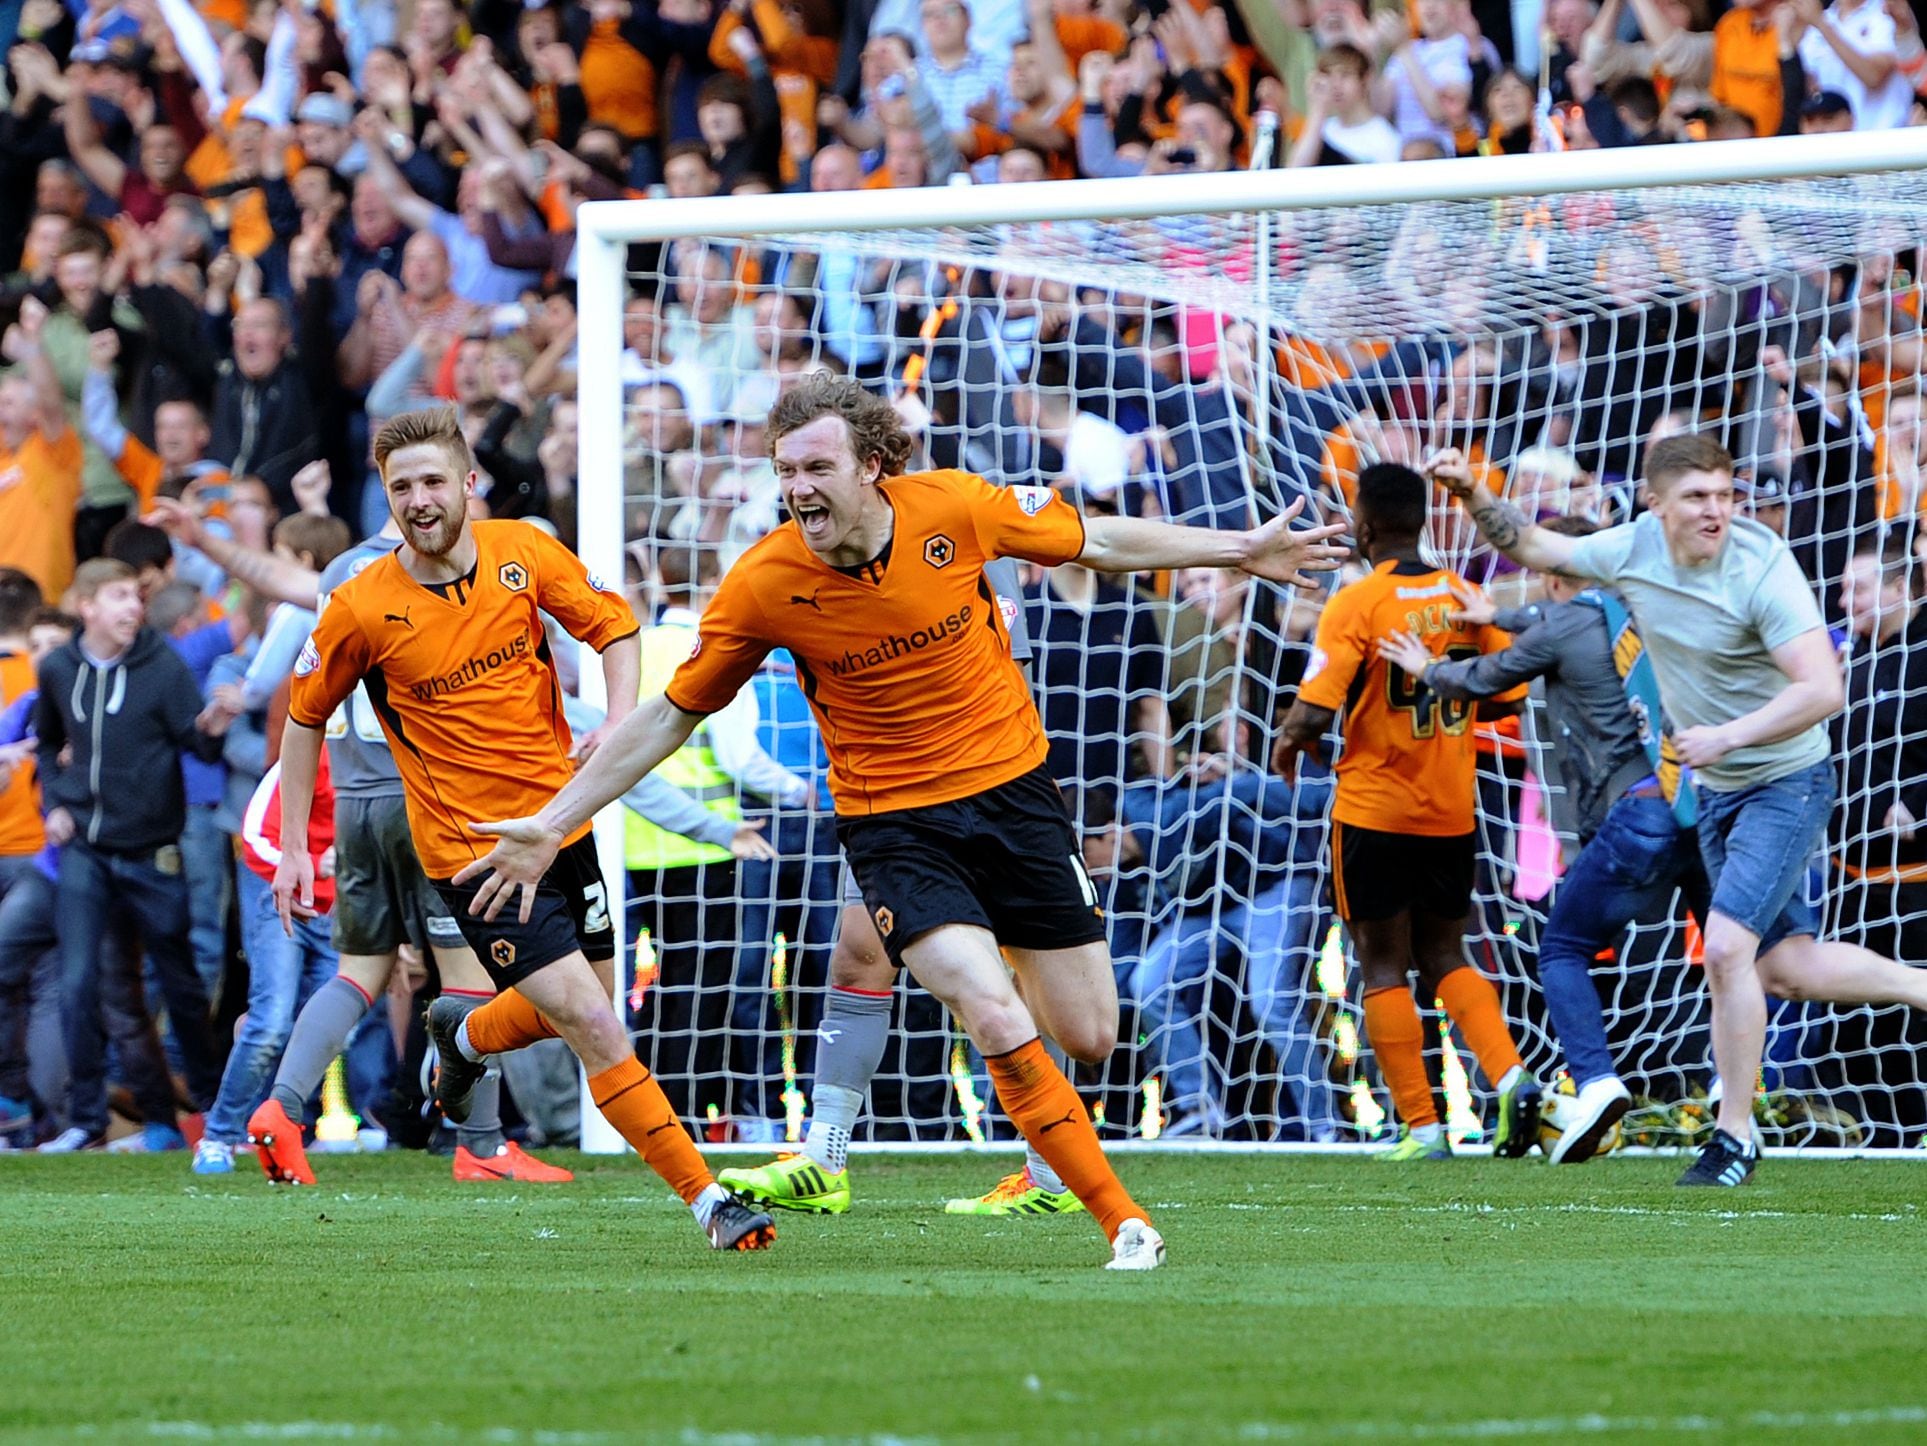 Wolves favourite to return to city for fan event